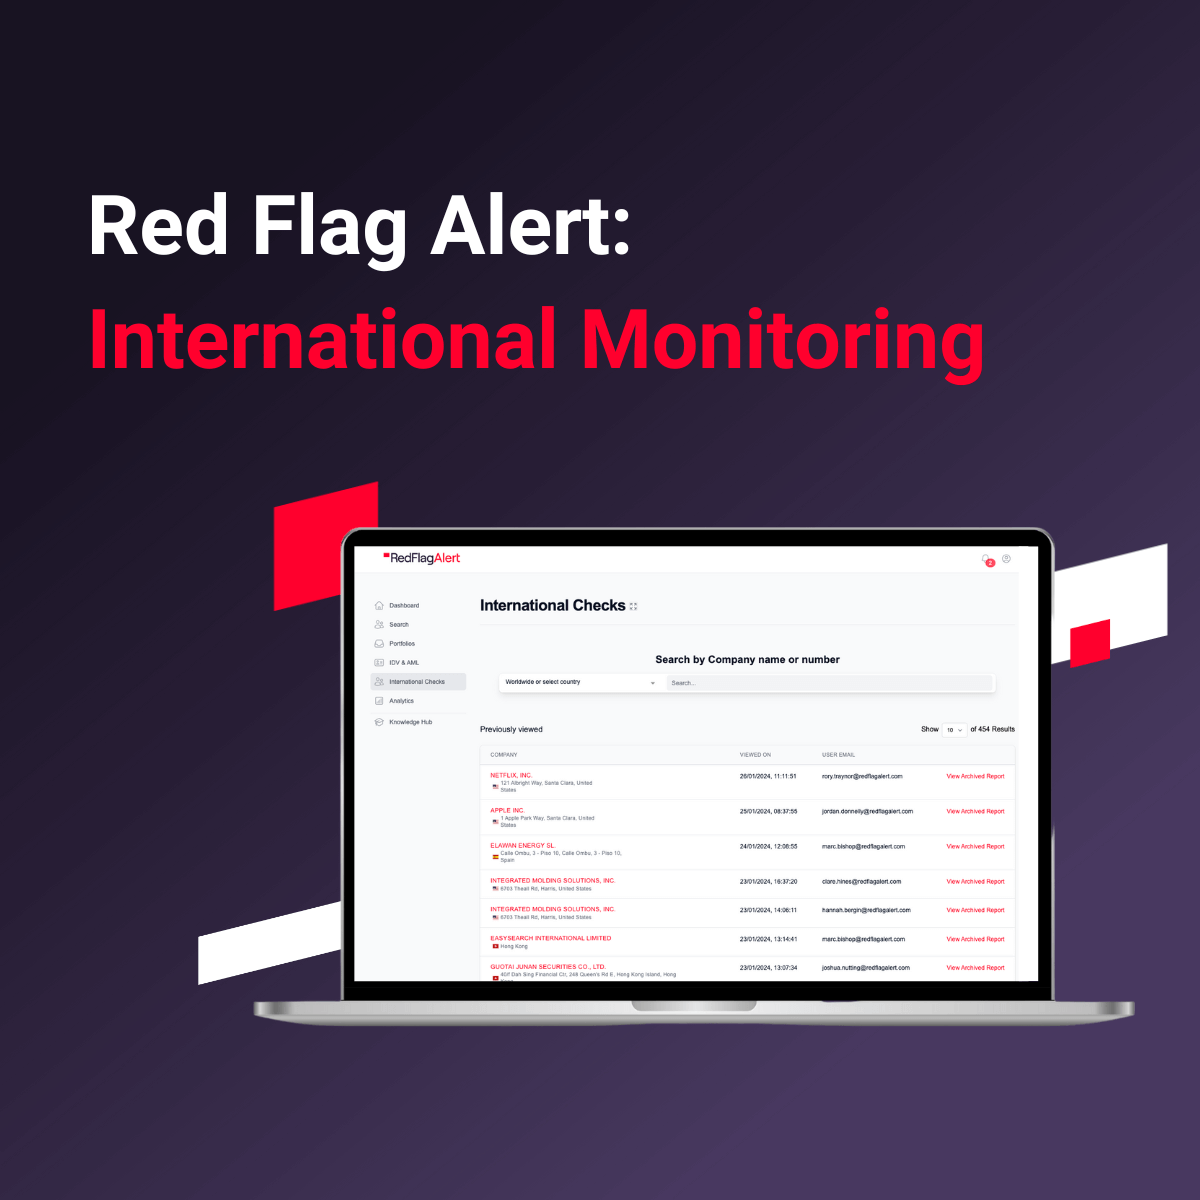 Announcing Our Groundbreaking New International Monitoring Feature